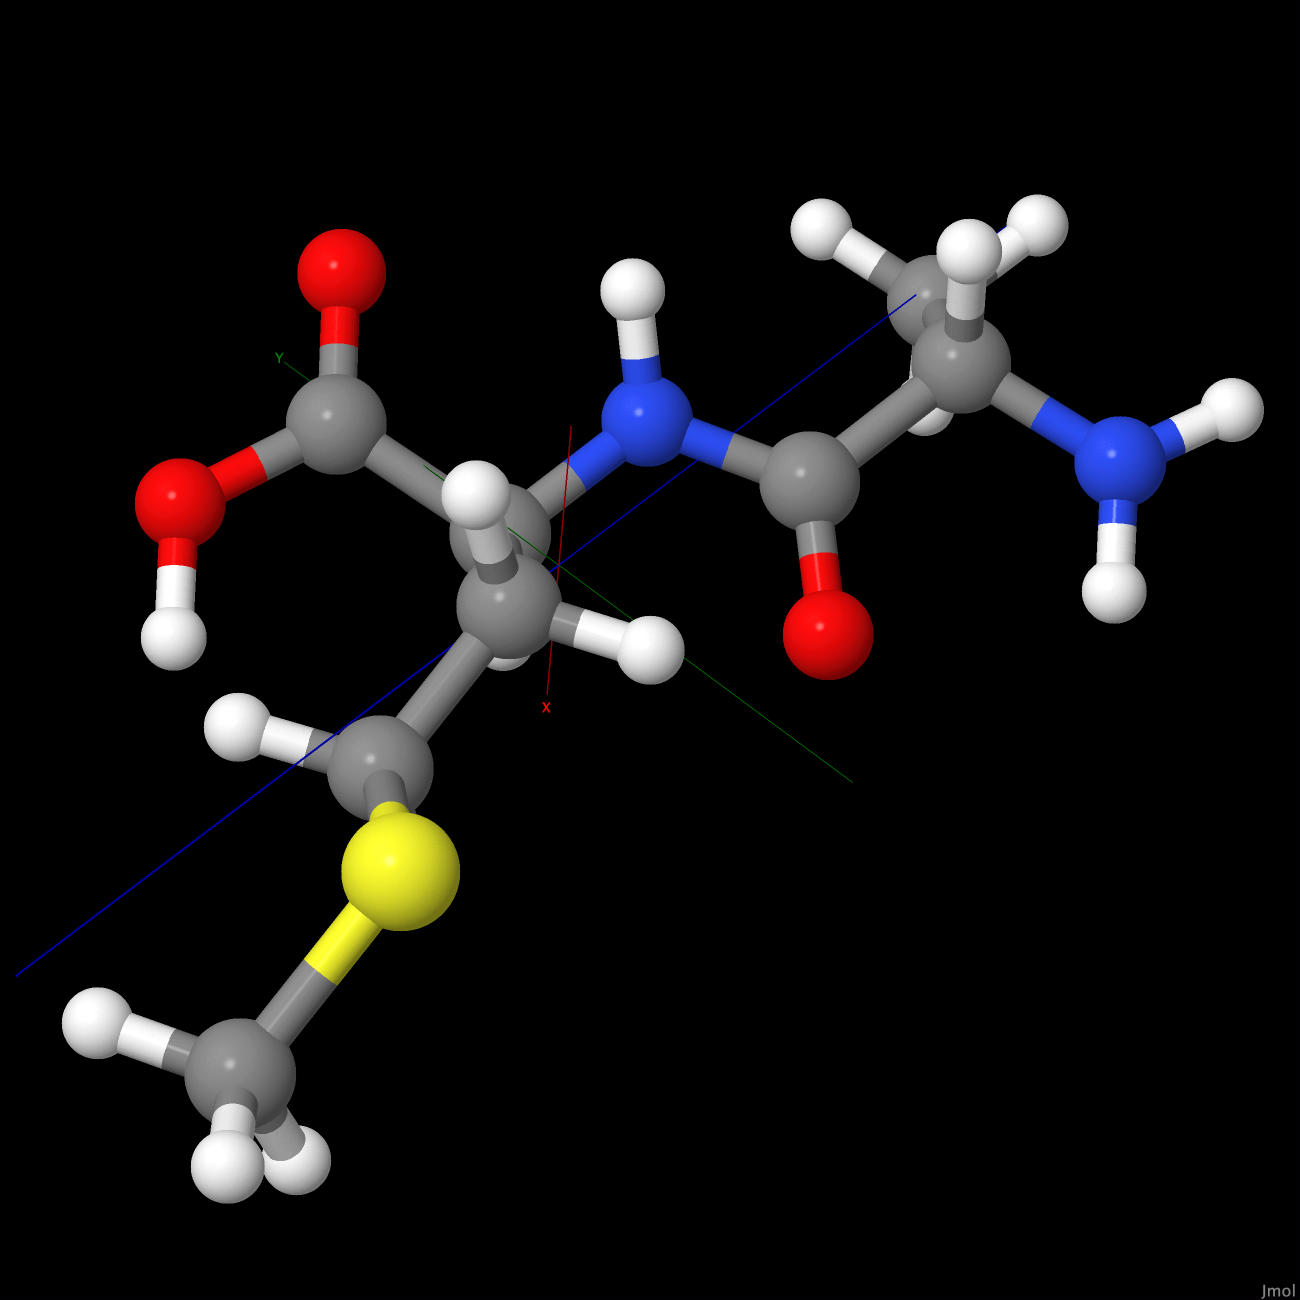 Orient molecule is a standalone python script that helps manipulate molecular structures